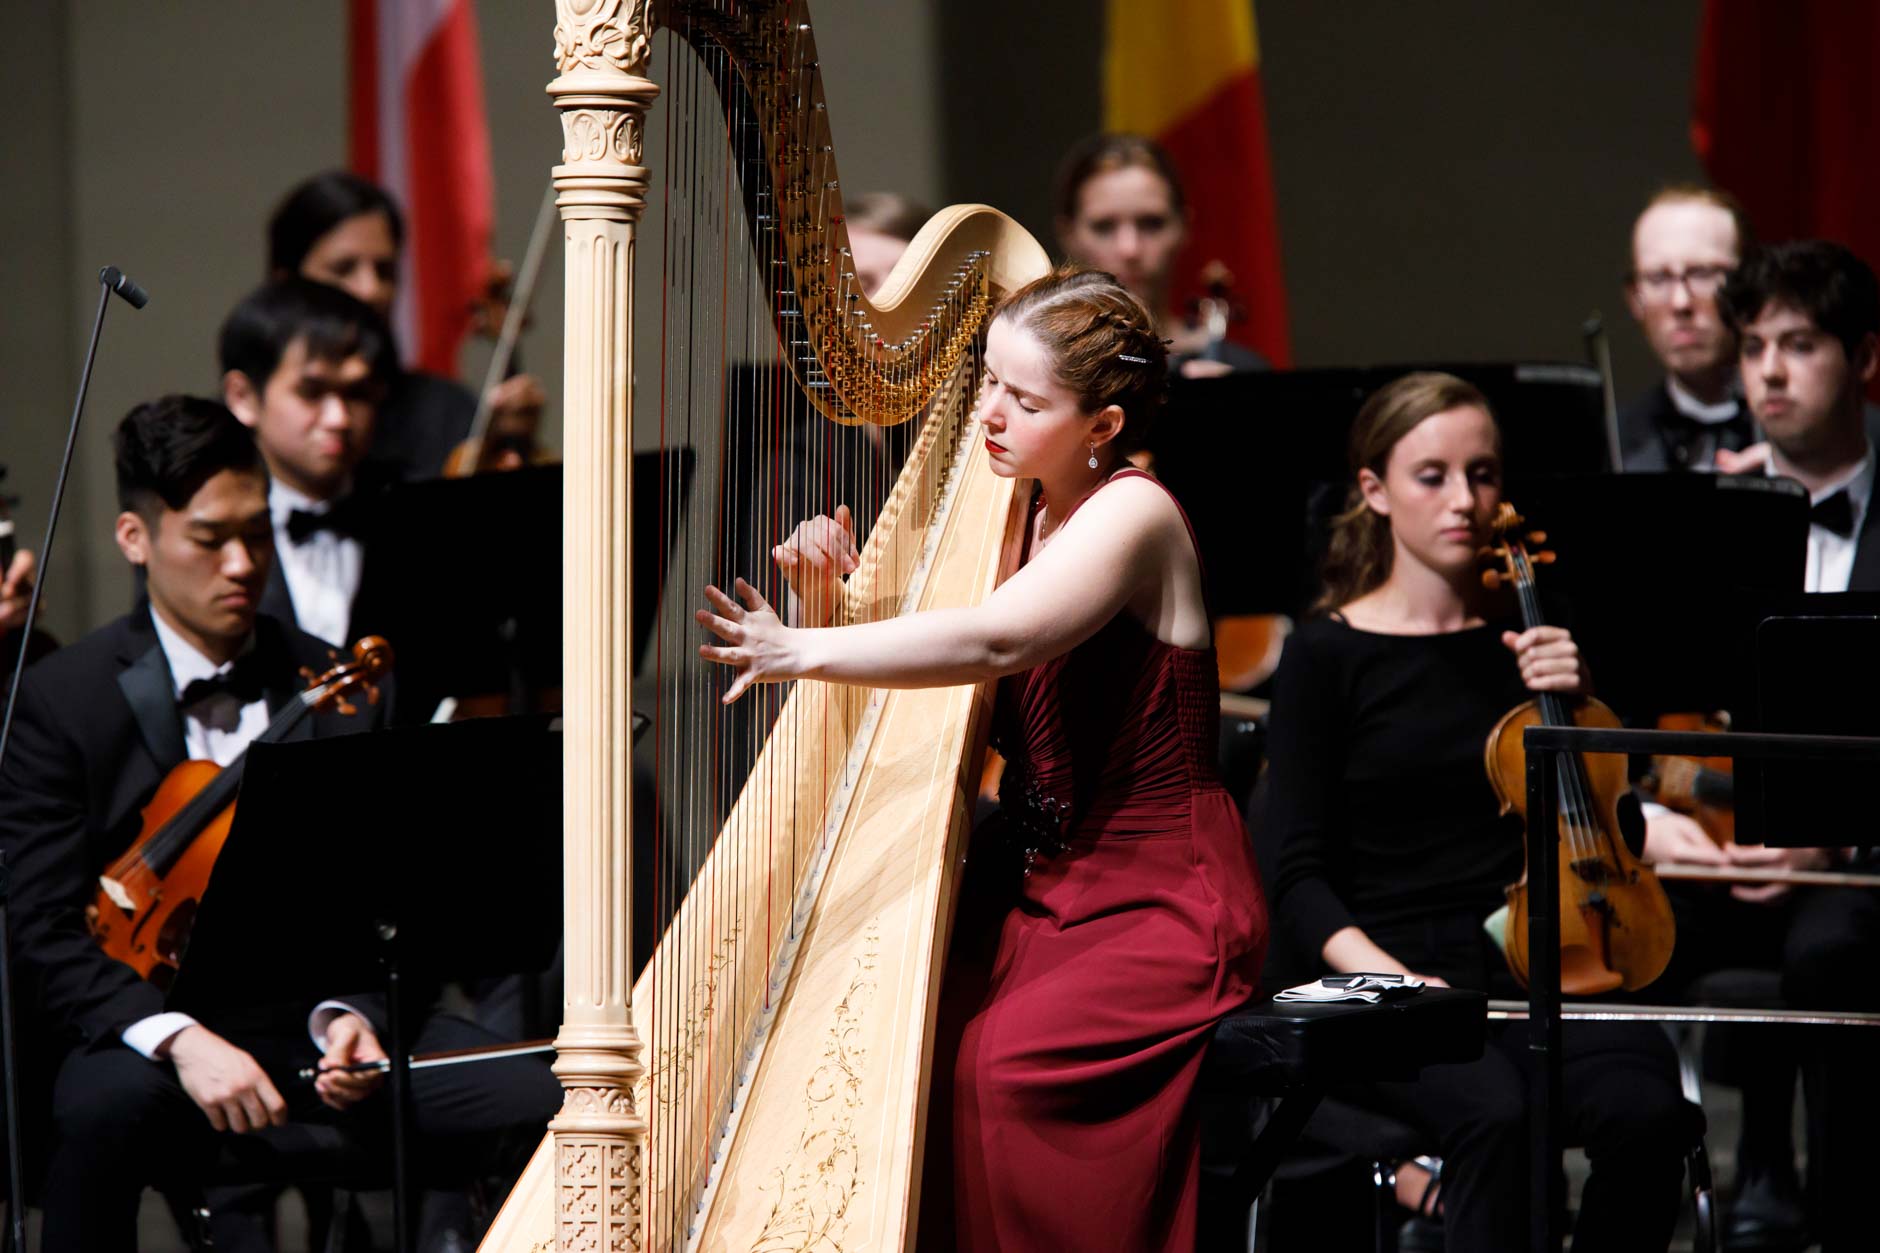 Melanie Laurent of France performs with the Indiana University Summer Philharmonic Orchestra during the Stage IV concert at the 11th USA International Harp Competition at Indiana University in Bloomington, Indiana on Saturday, July 13, 2019. (Photo by James Brosher)